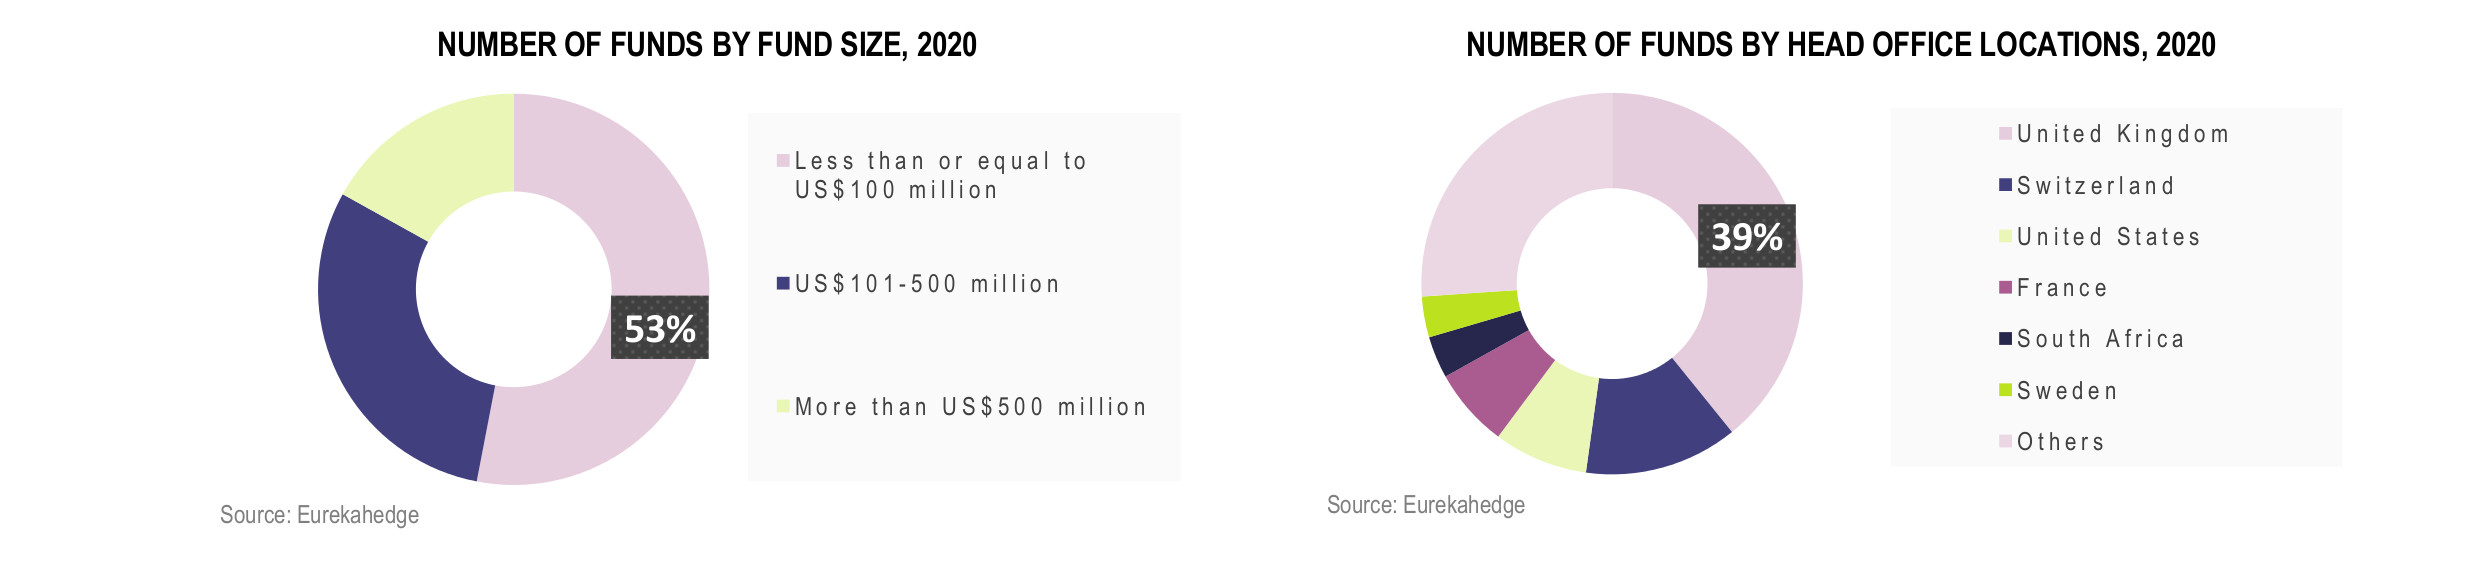 European Hedge Funds Infographic April 2020 - funds by fund size and head office location